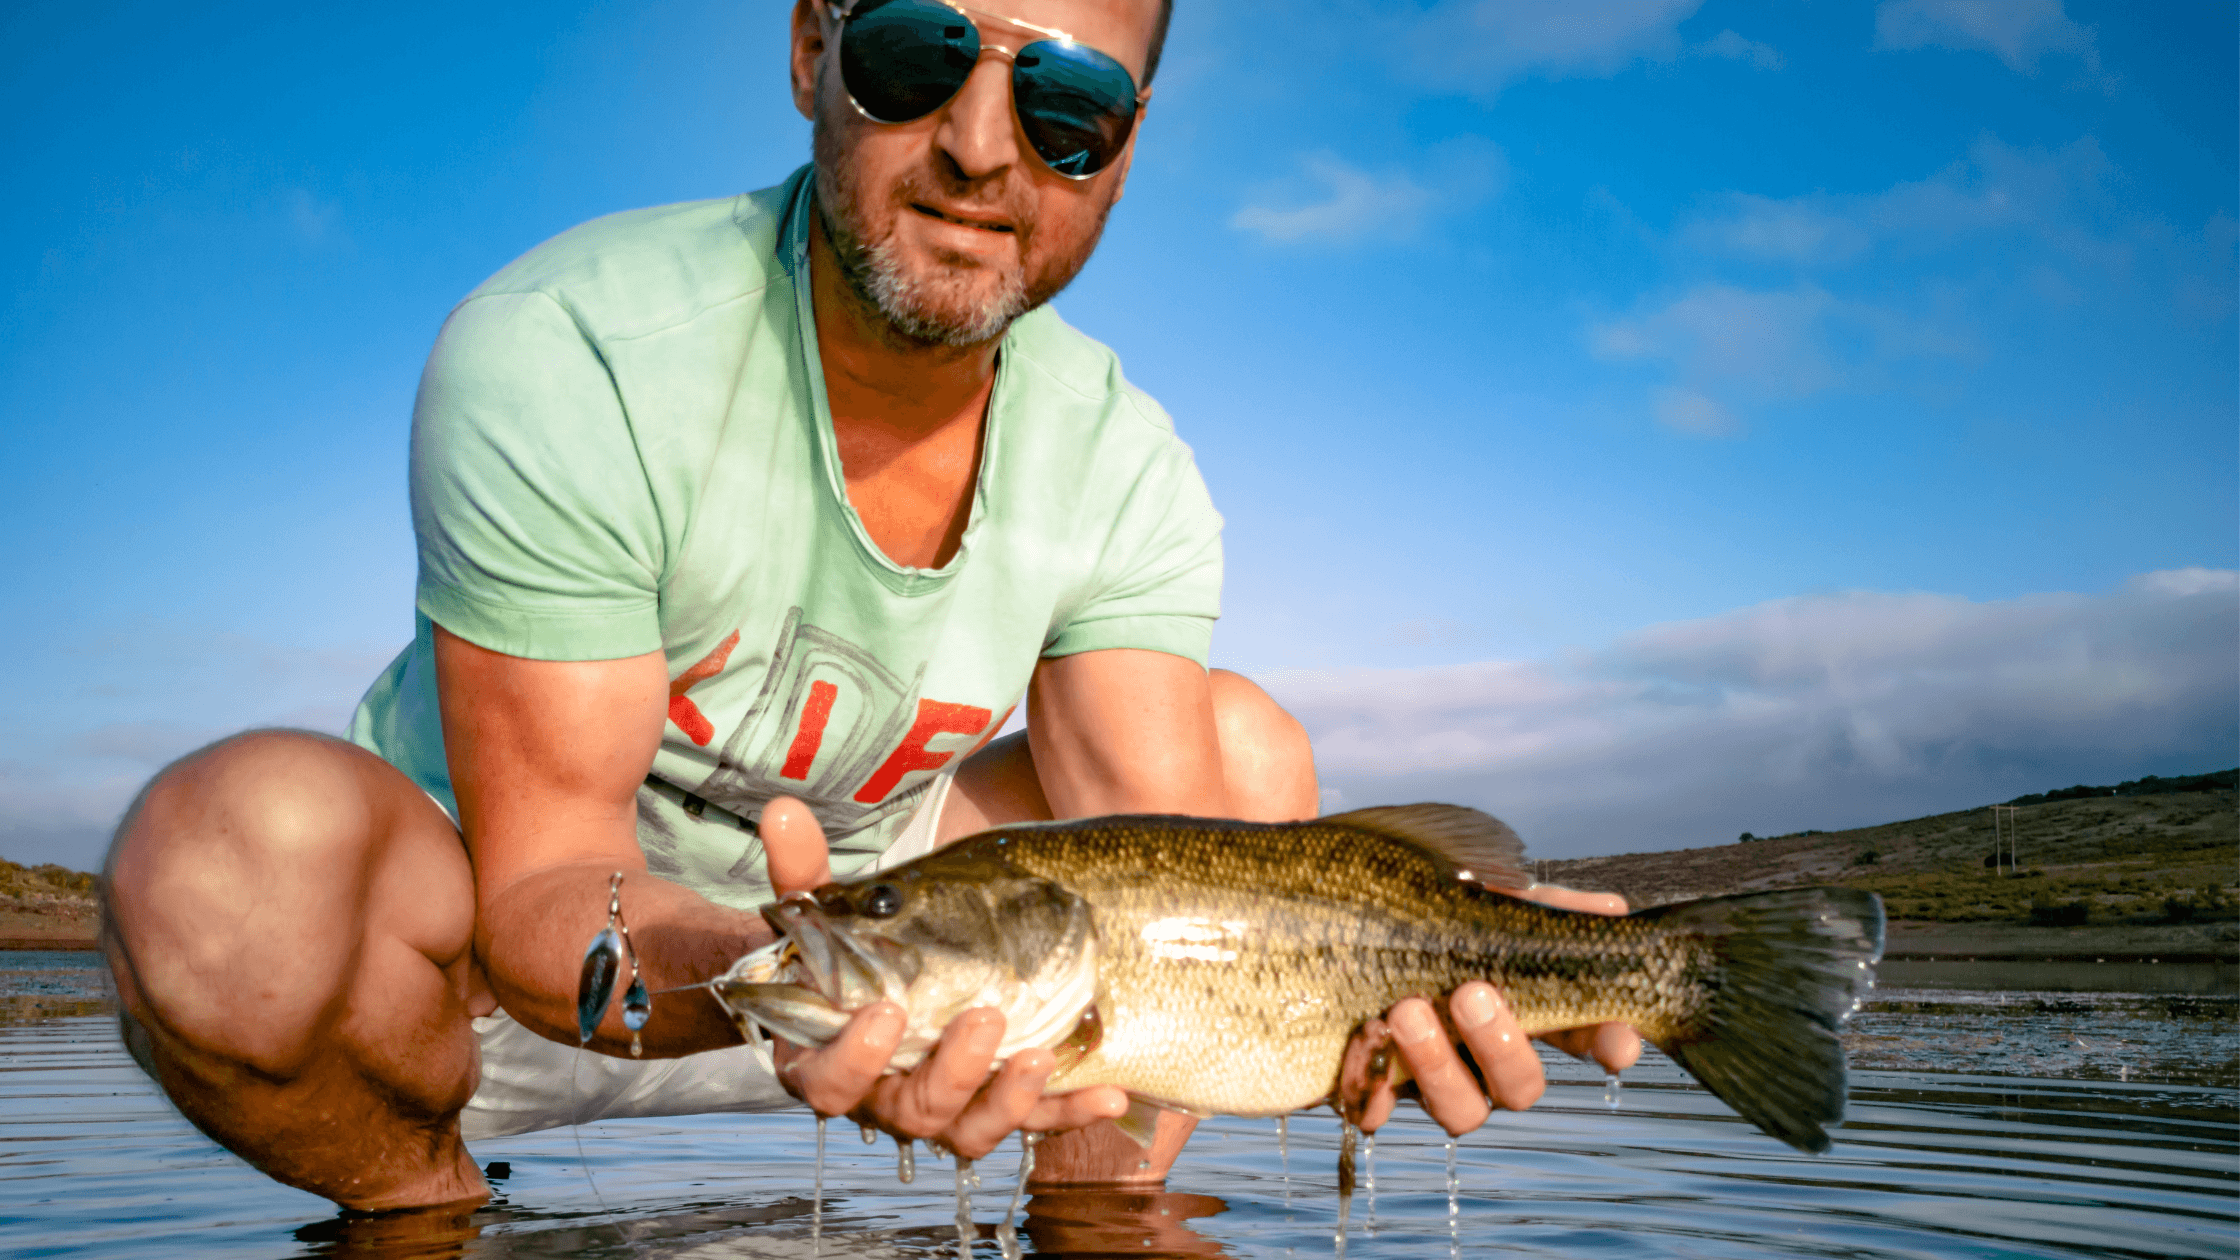 The Australians Guide to Catching Bass